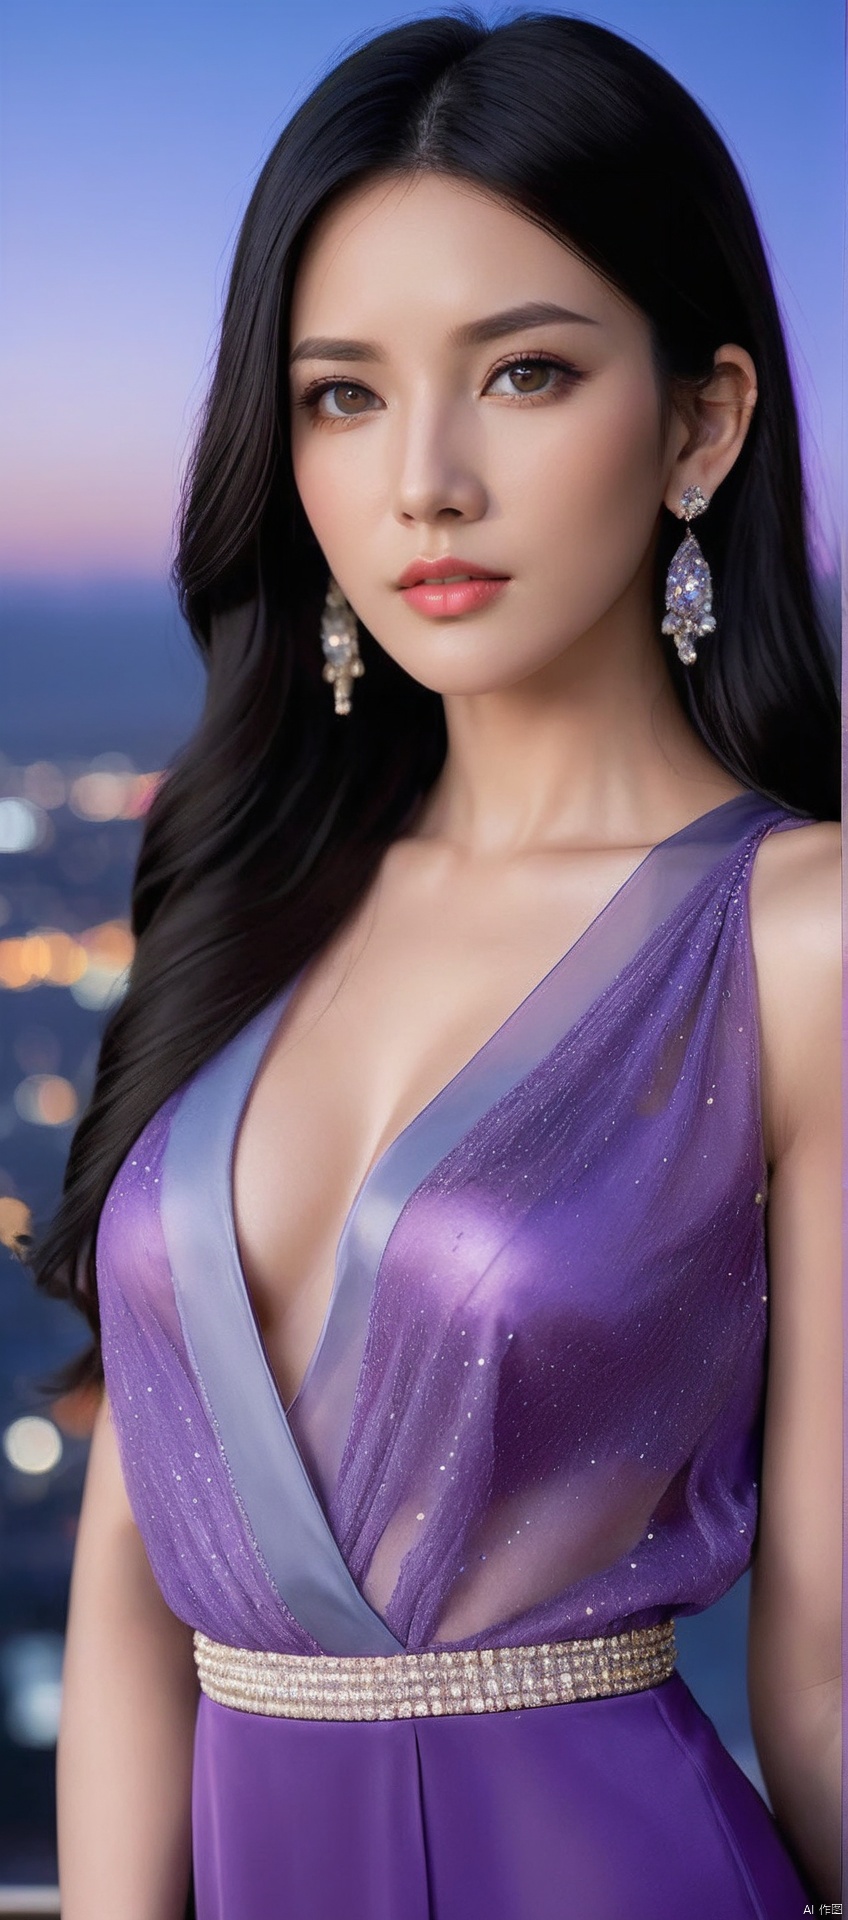 8k,RAW, Fujifilm XT3, masterpiece, best quality, photorealistic of 1girl ,solo, diamond stud earrings, long straight black hair, hazel eyes, serious expression, slender figure, wearing a purple blouse, standing against a city skyline at night,masterpiece,1girl,purple dress,(upper body shot), (upper body view),best quality,long hair, black hair,dodger see through clothes,purple transparent shawl,earrings,beautiful symmetrical face,in the style of elegant clothing,skin white and smooth,high heels,g001,